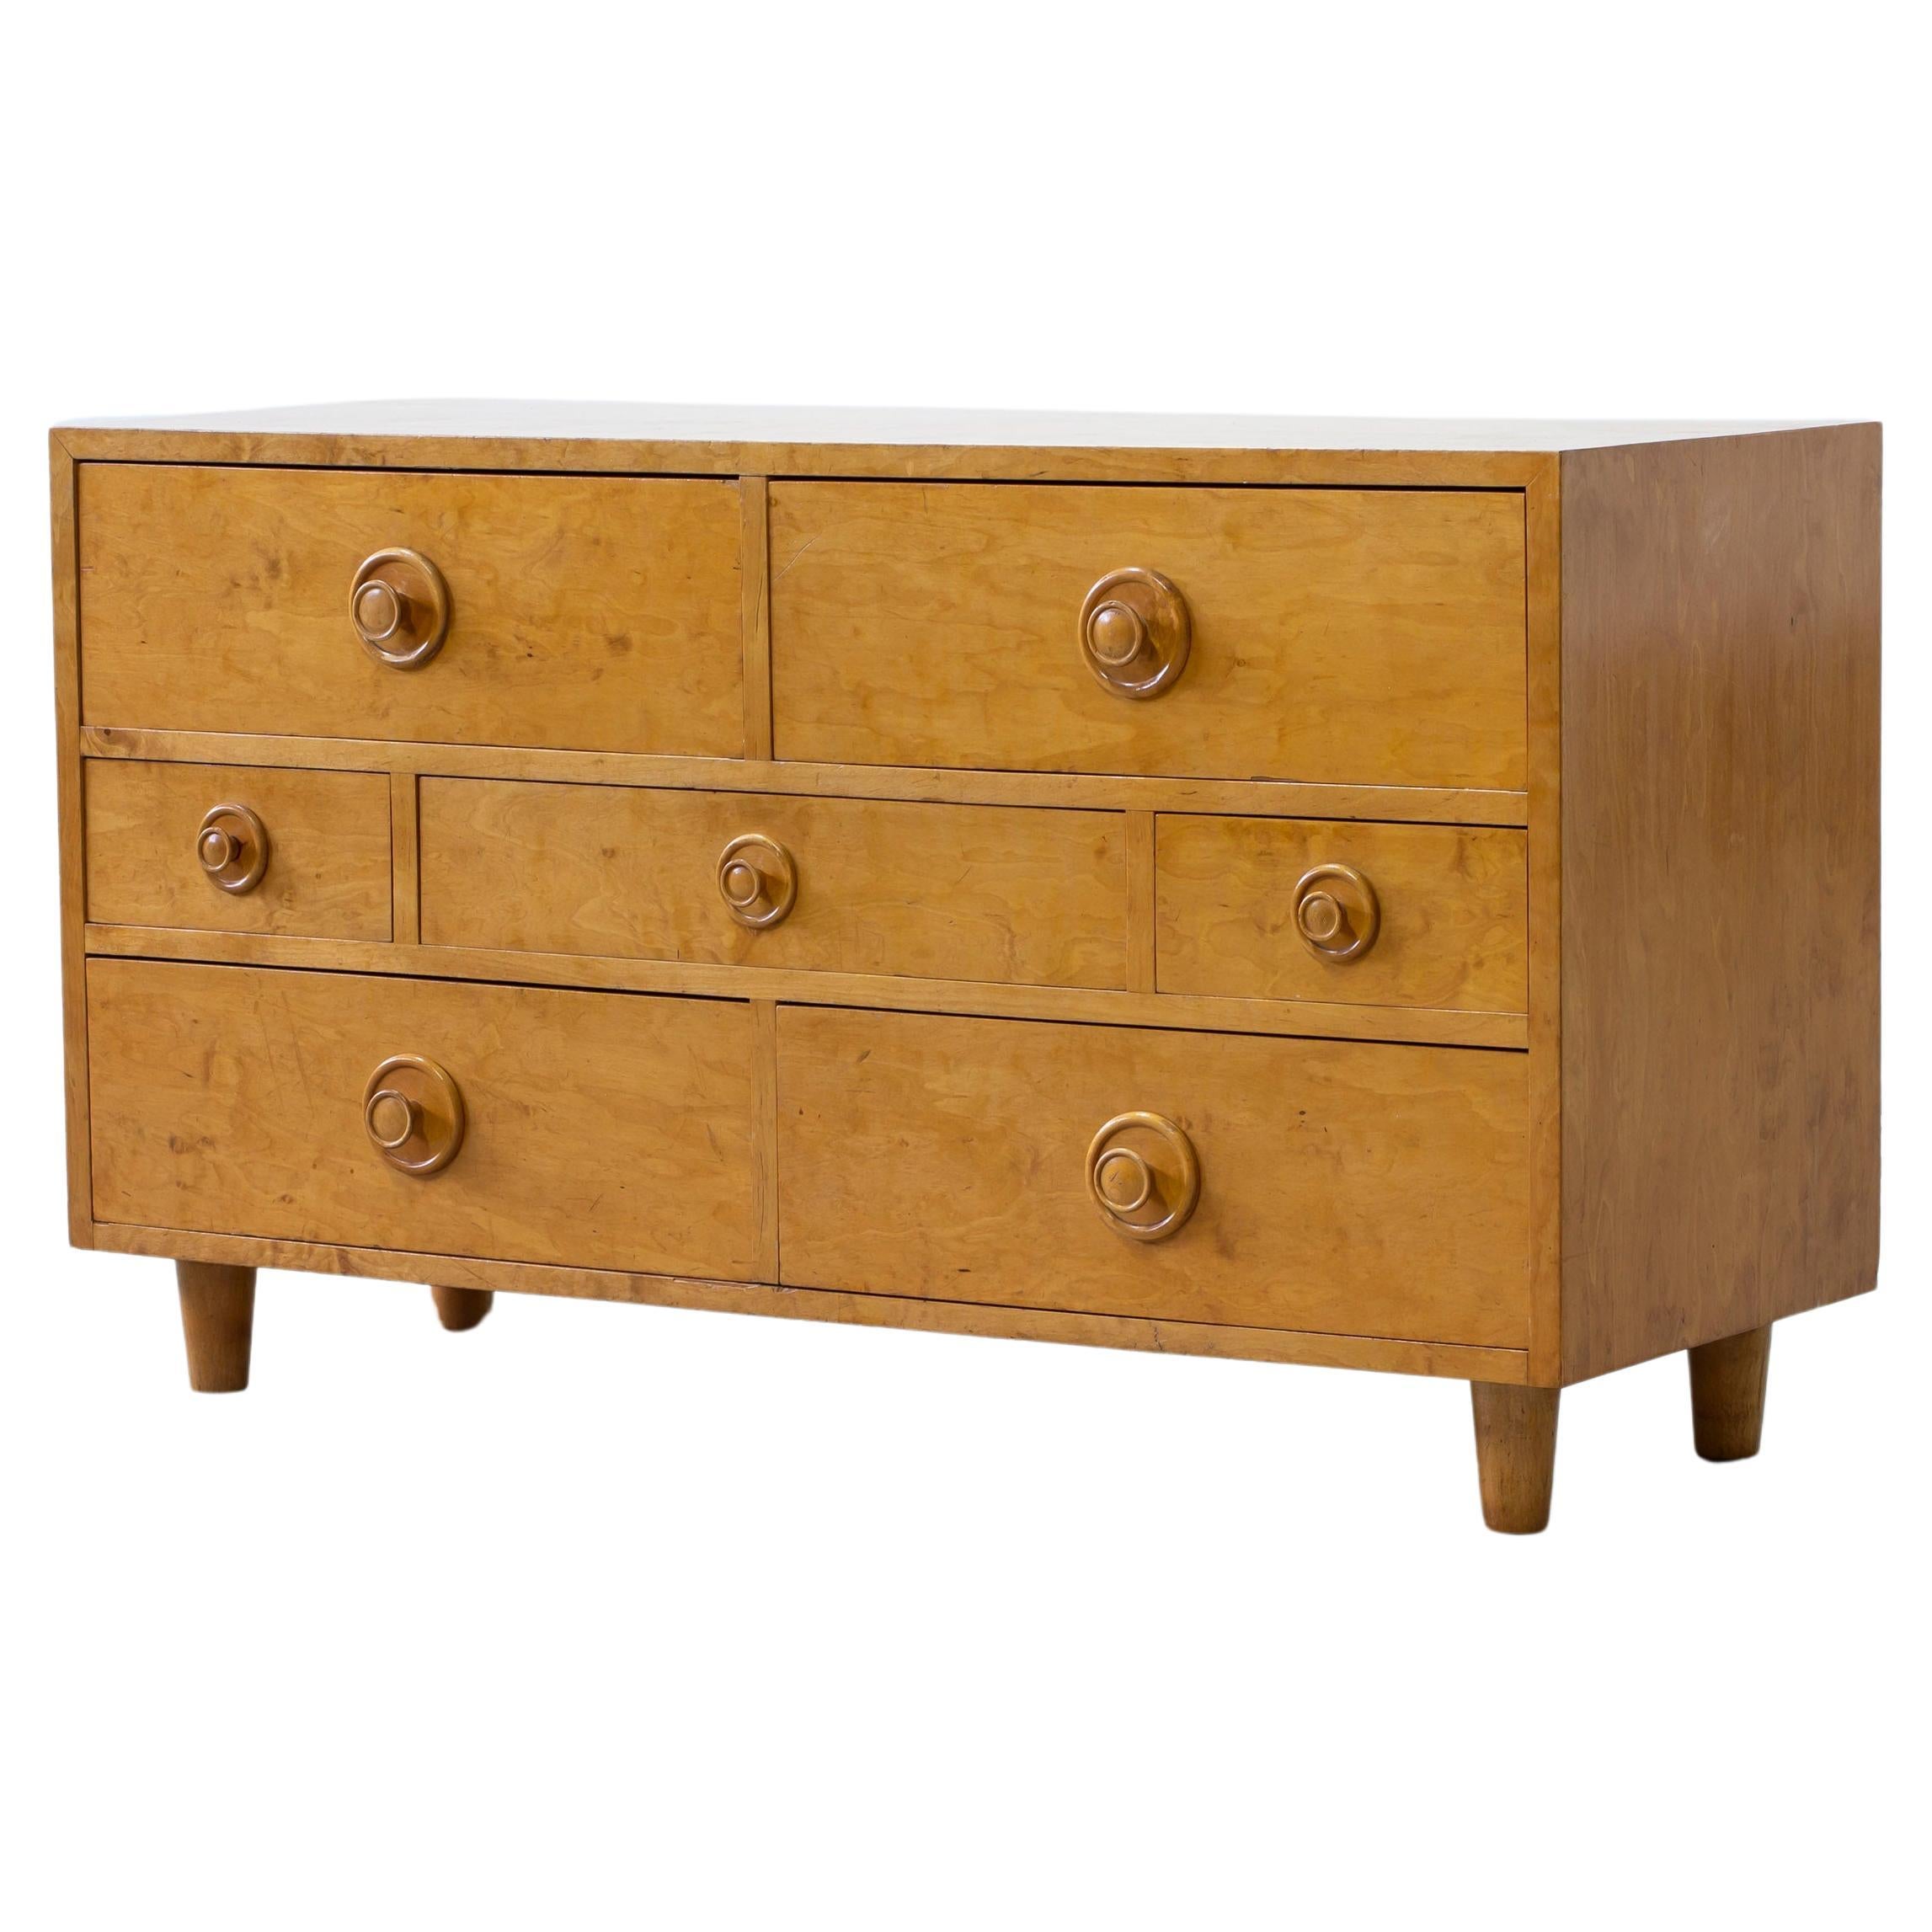 Swedish modern chest of drawers in flame birch, in the style of Josef Frank